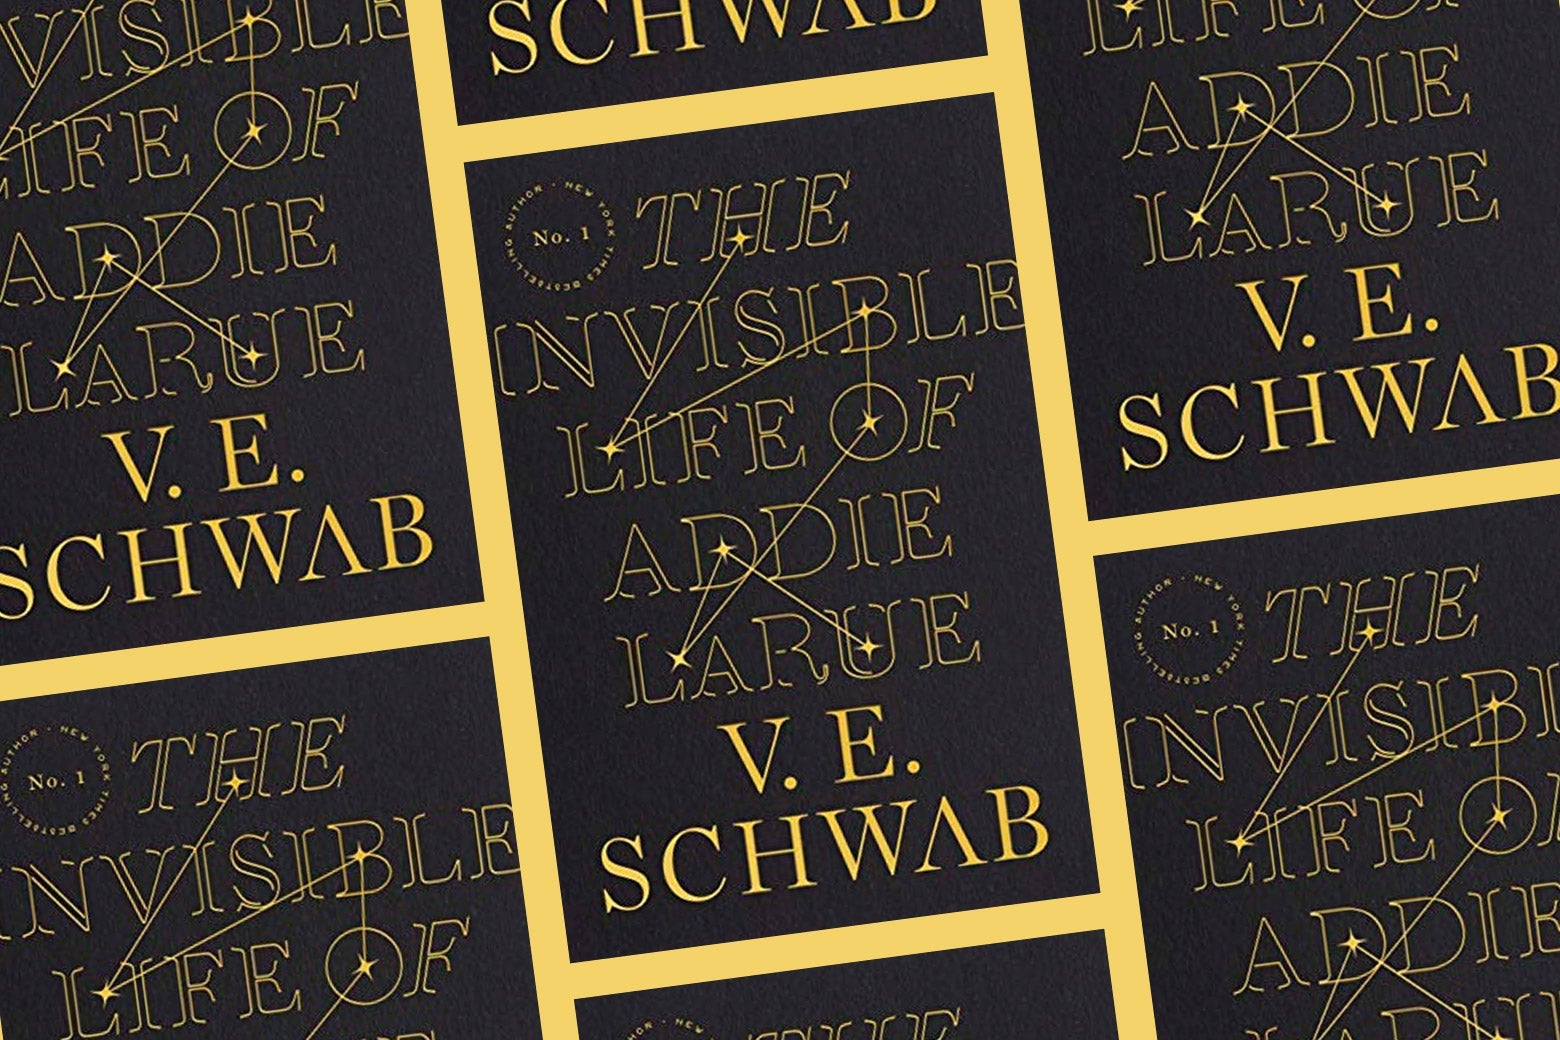 Repeating pattern of the cover of The Invisible Life of Addie LaRue.